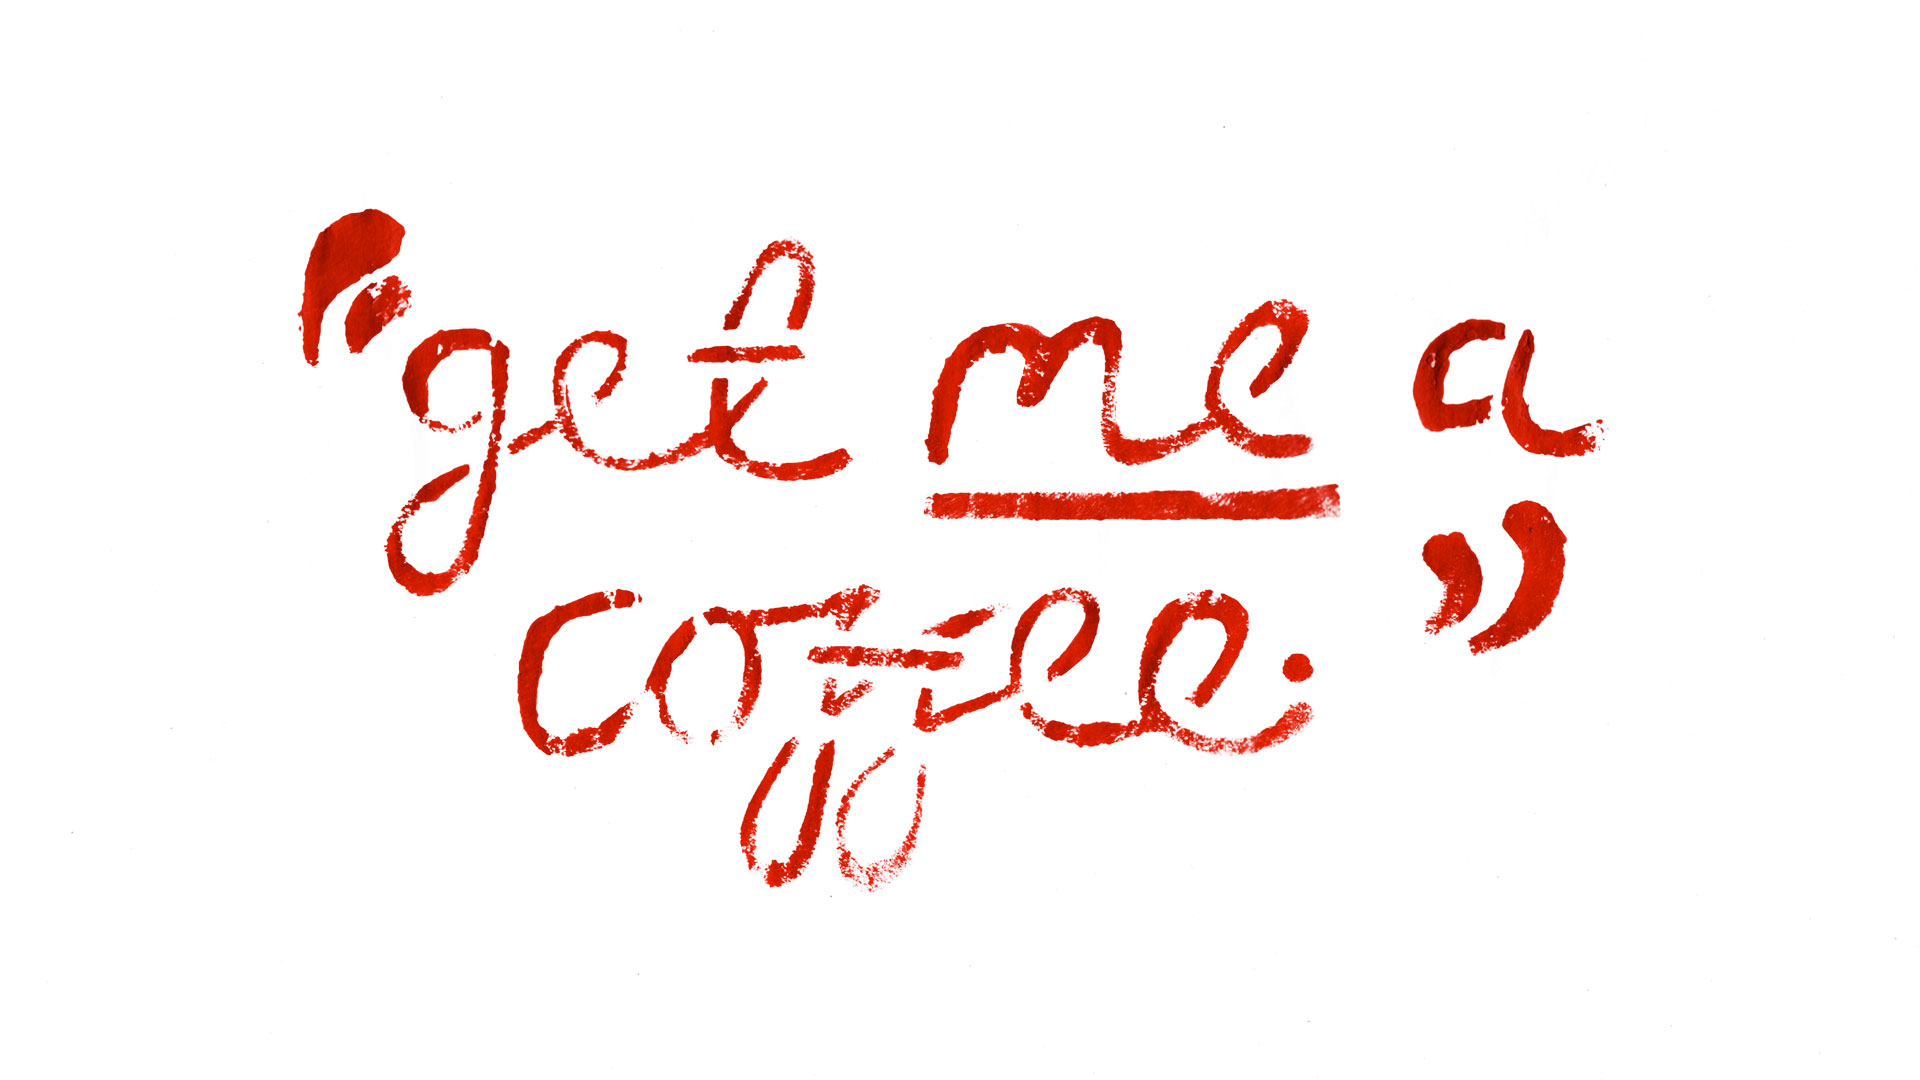 Print depicting the words 'get me a coffee' in lowercase, cursive hand-lettering. The lettering looks textured due to the use of a stencil and applying acrylic paint with a sponge. The words are in dark red paint and centrally aligned against a white background.